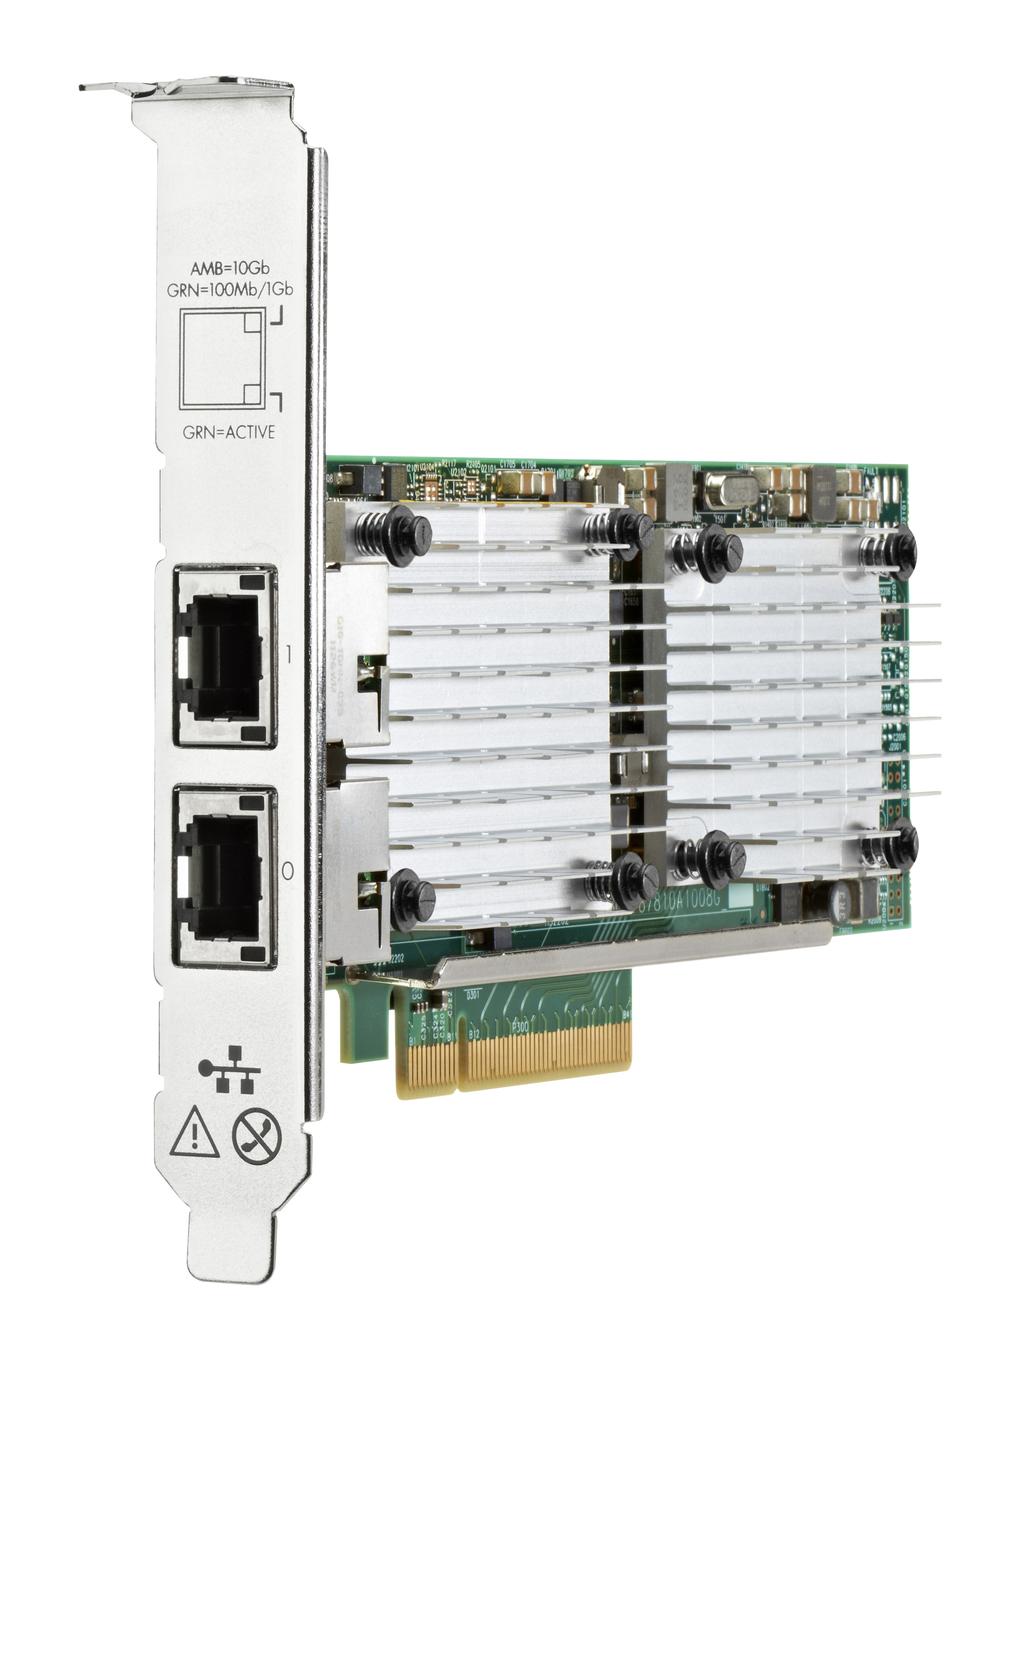 Overview Recommended SKU - This adapter is a recommended option that has been selected by HPE experts to provide the right technology for a range of workloads and market segments offering the best